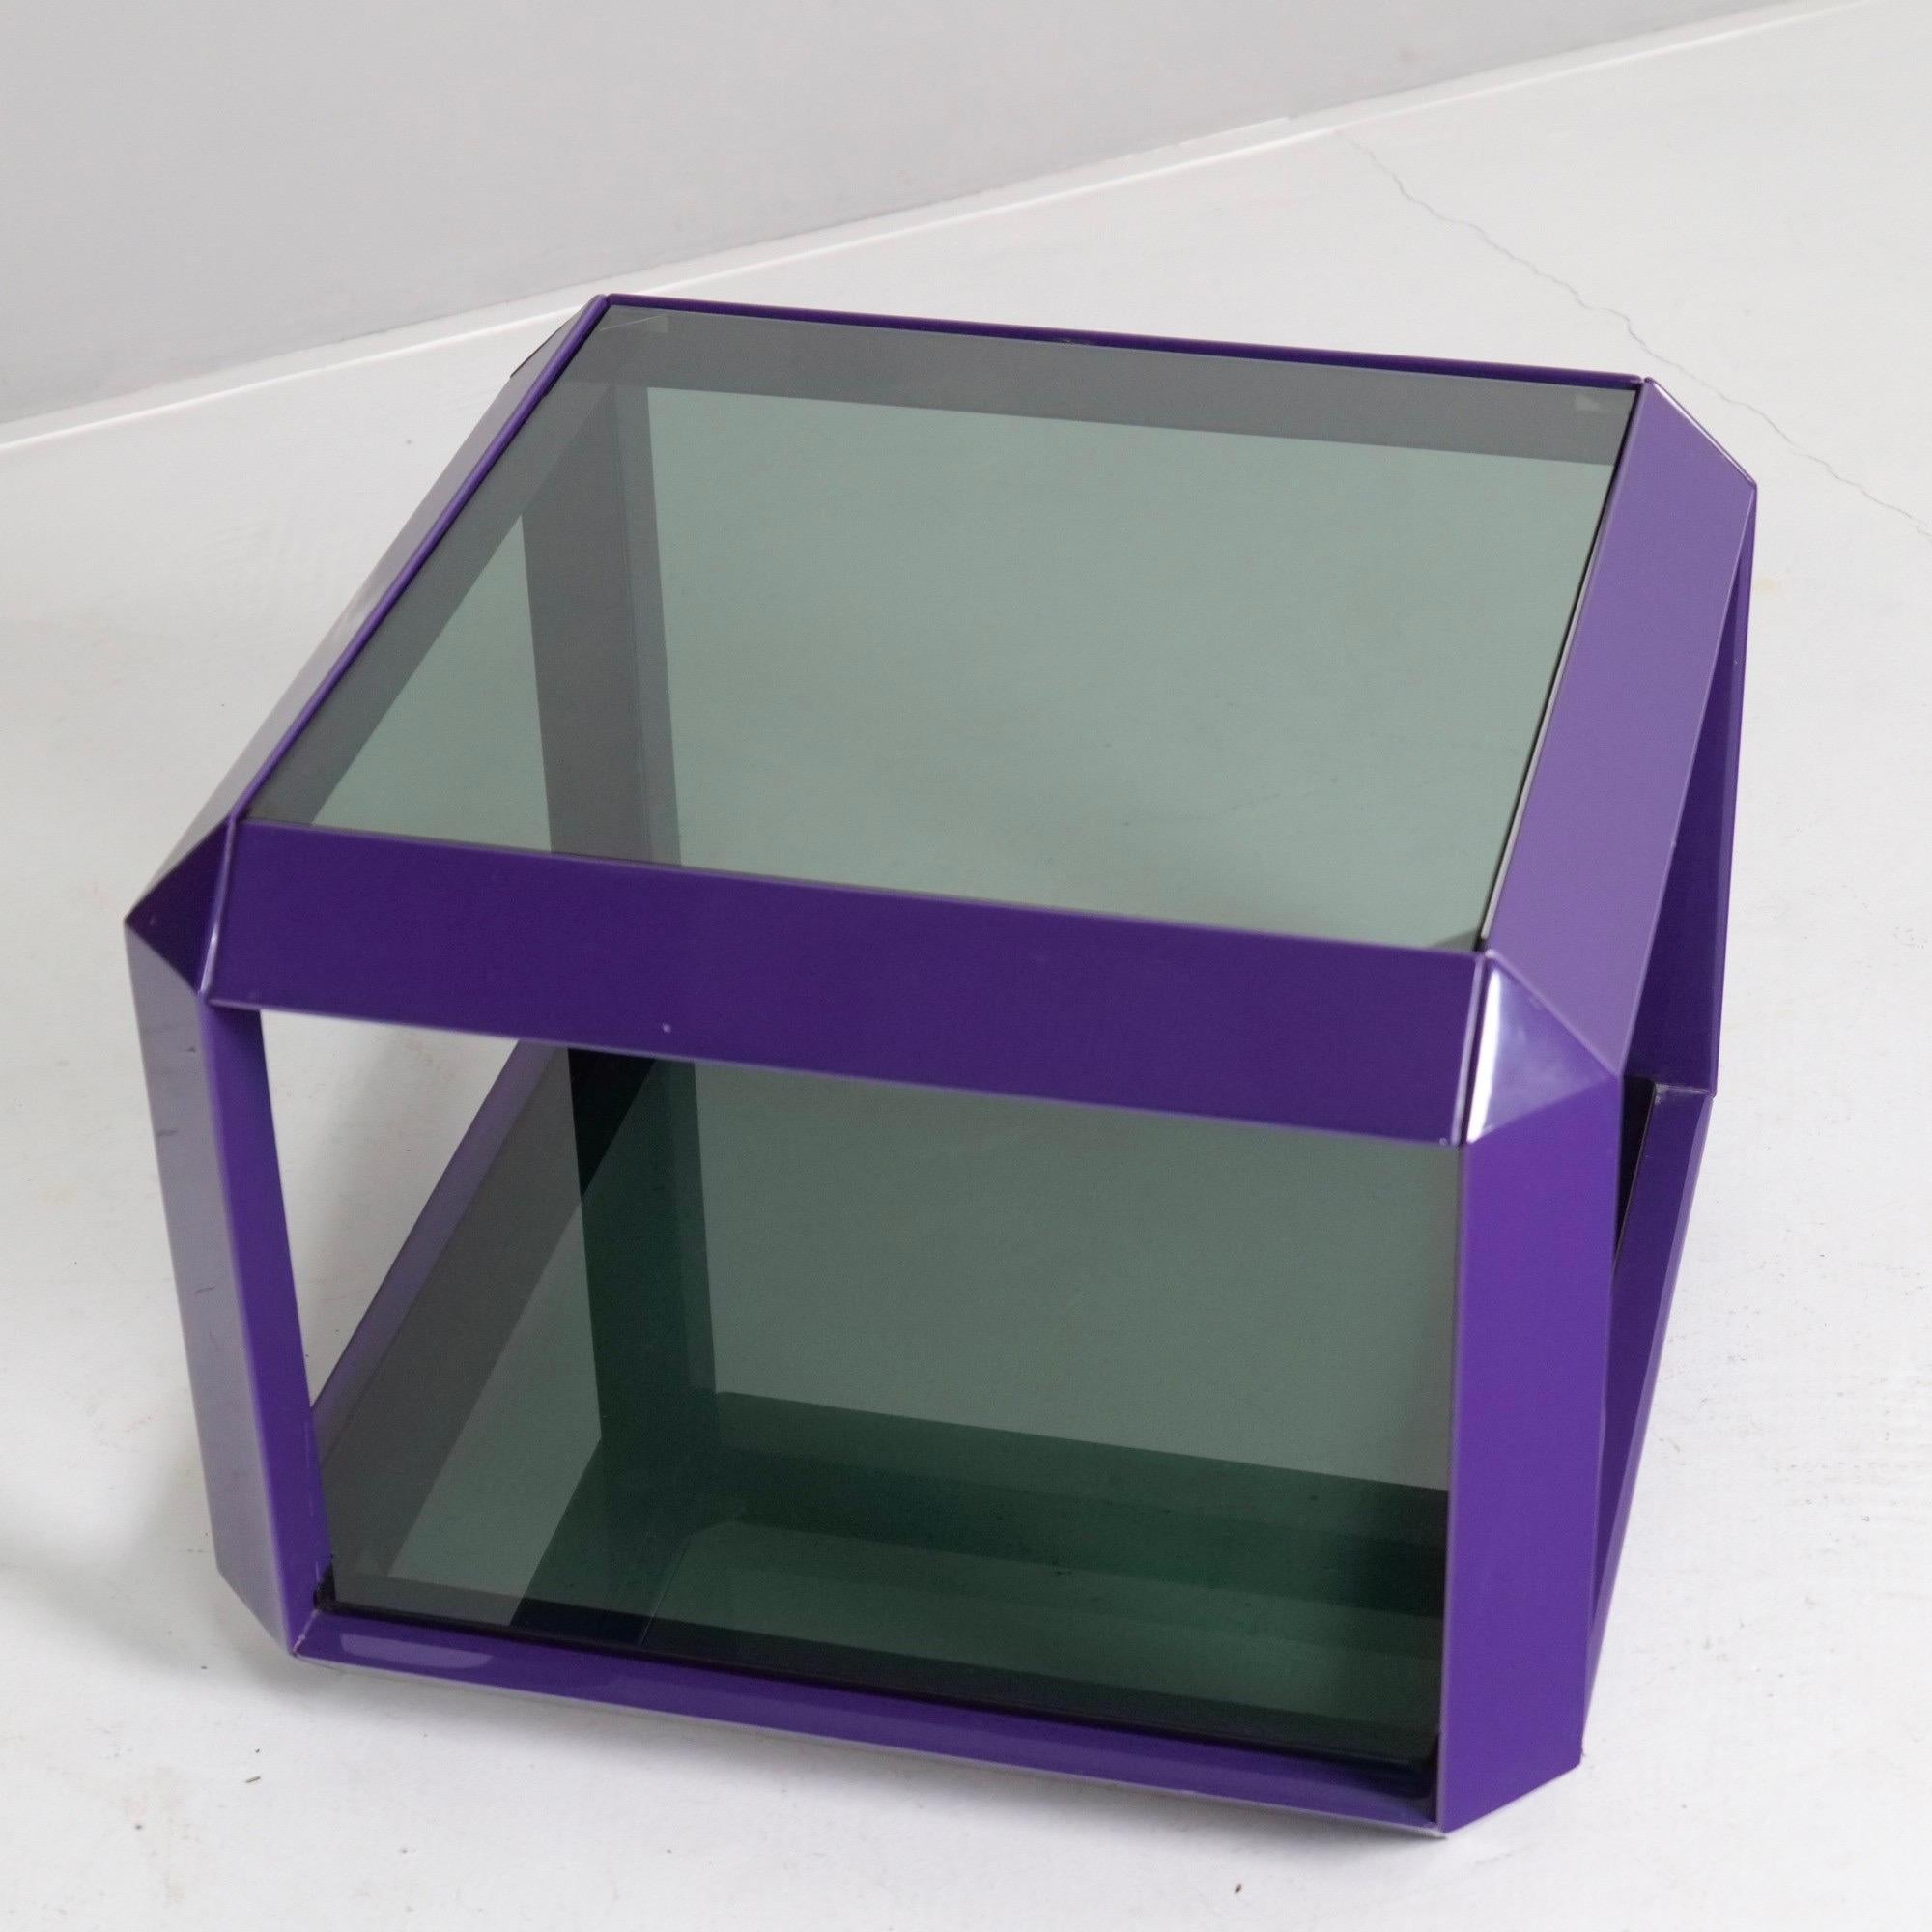 Coffee table by Alberto Rosselli with two levels in smoked glass.